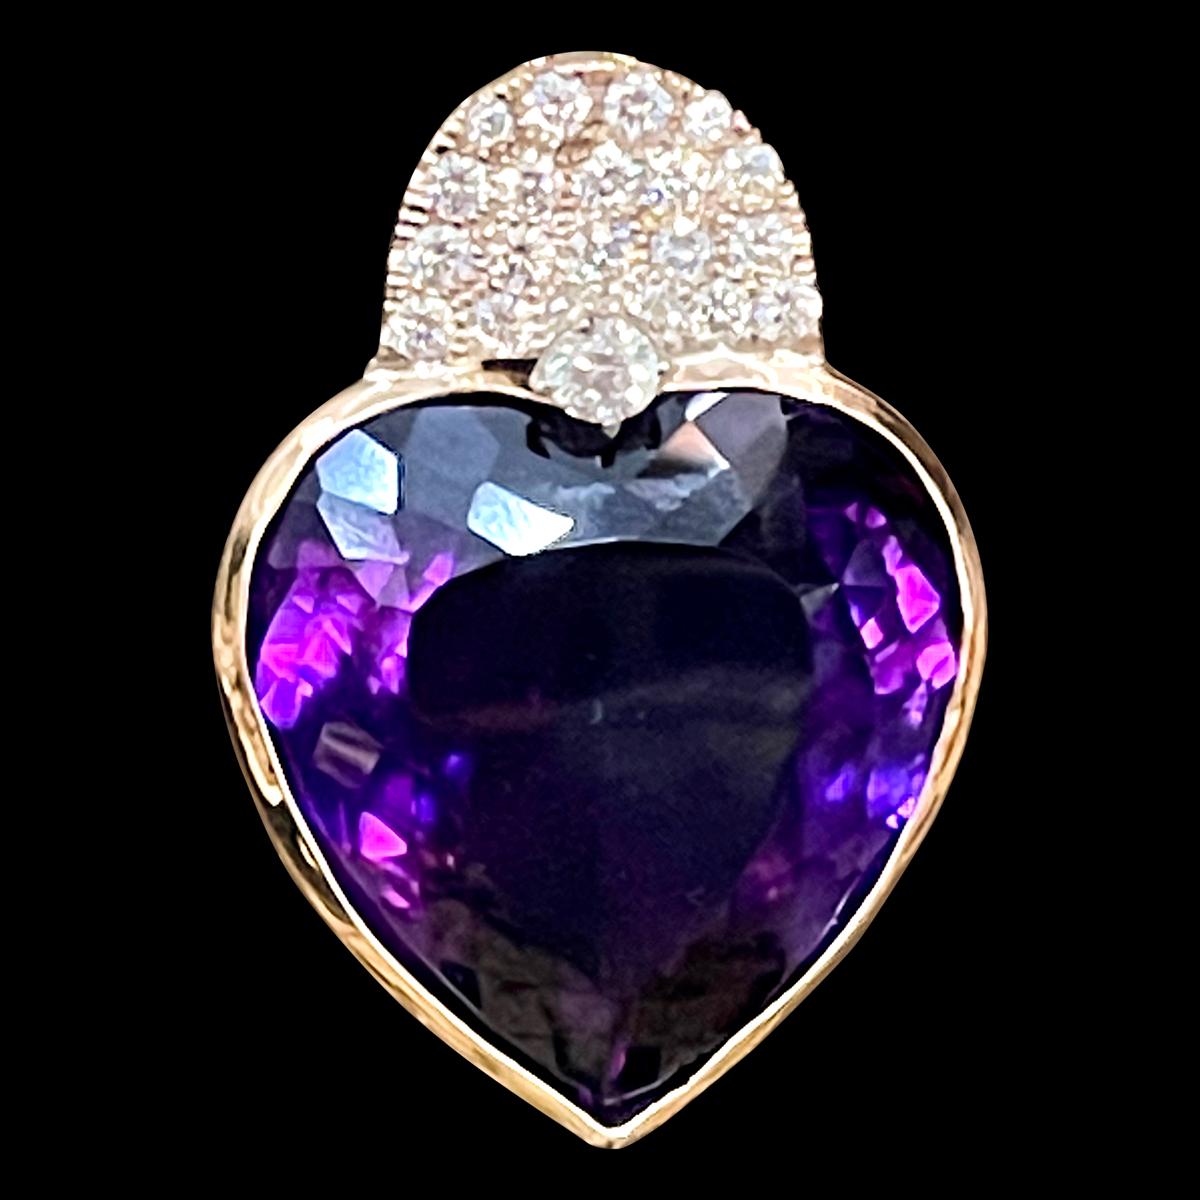   Approximately 103 Carat Heart Shape Amethyst & 3 Ct Diamond Pendant Necklace 14 Kt Yellow Gold
This spectacular Pendant Necklace  consisting of a single large Perfect heart shape l Amethyst , approximately 103-105  Carat.  The  Amethyst   Has